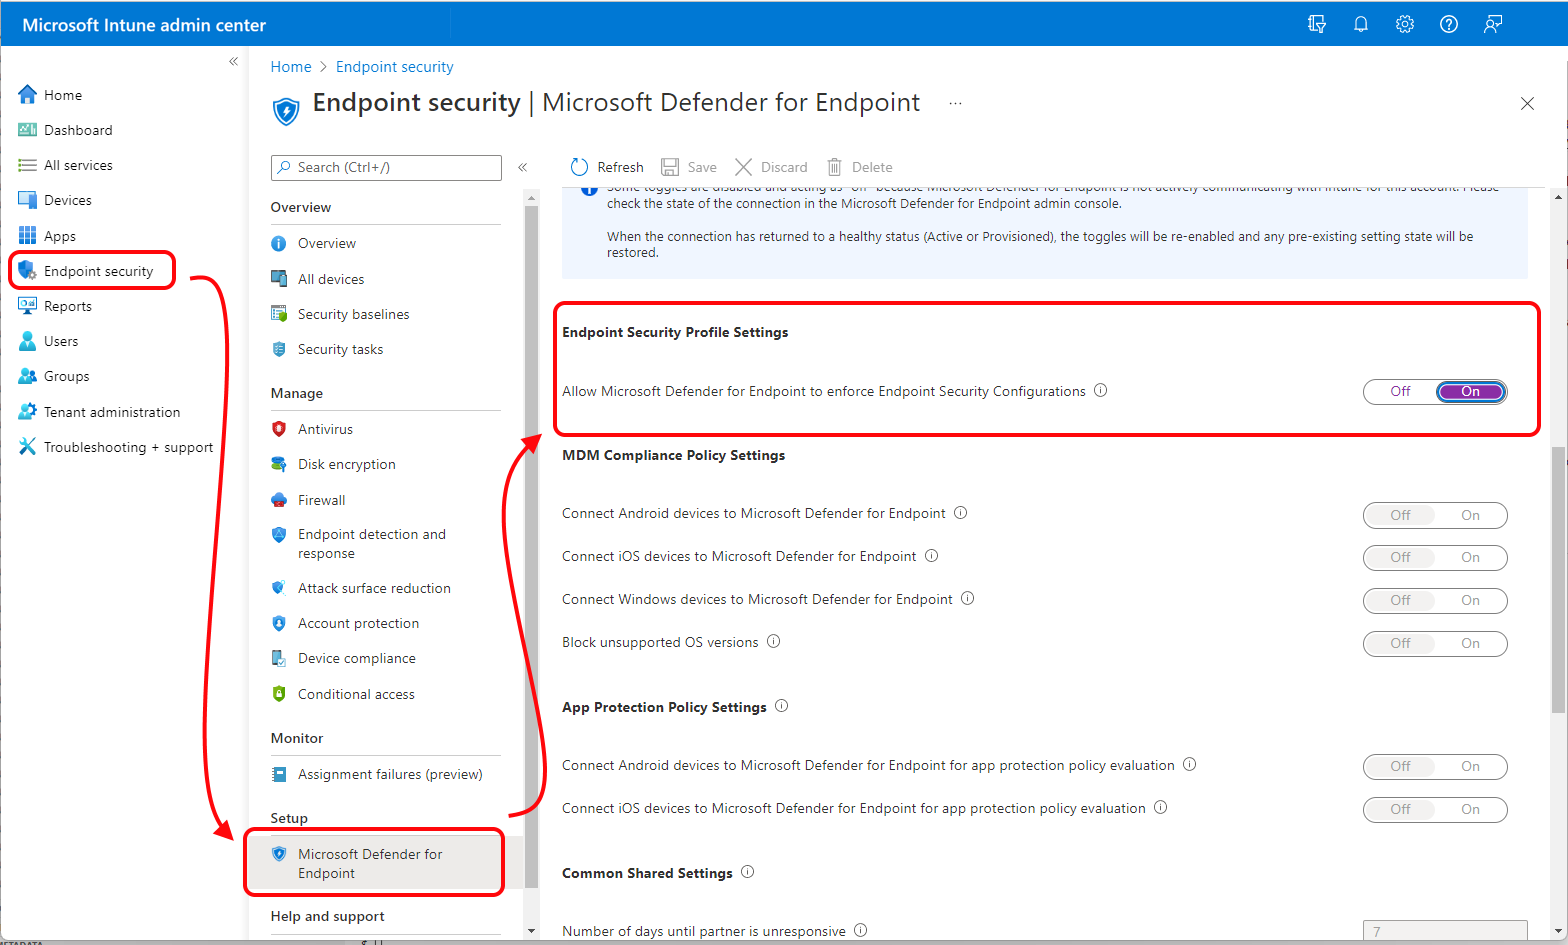 Enable Microsoft Defender for Endpoint settings management in the Microsoft Intune admin center.